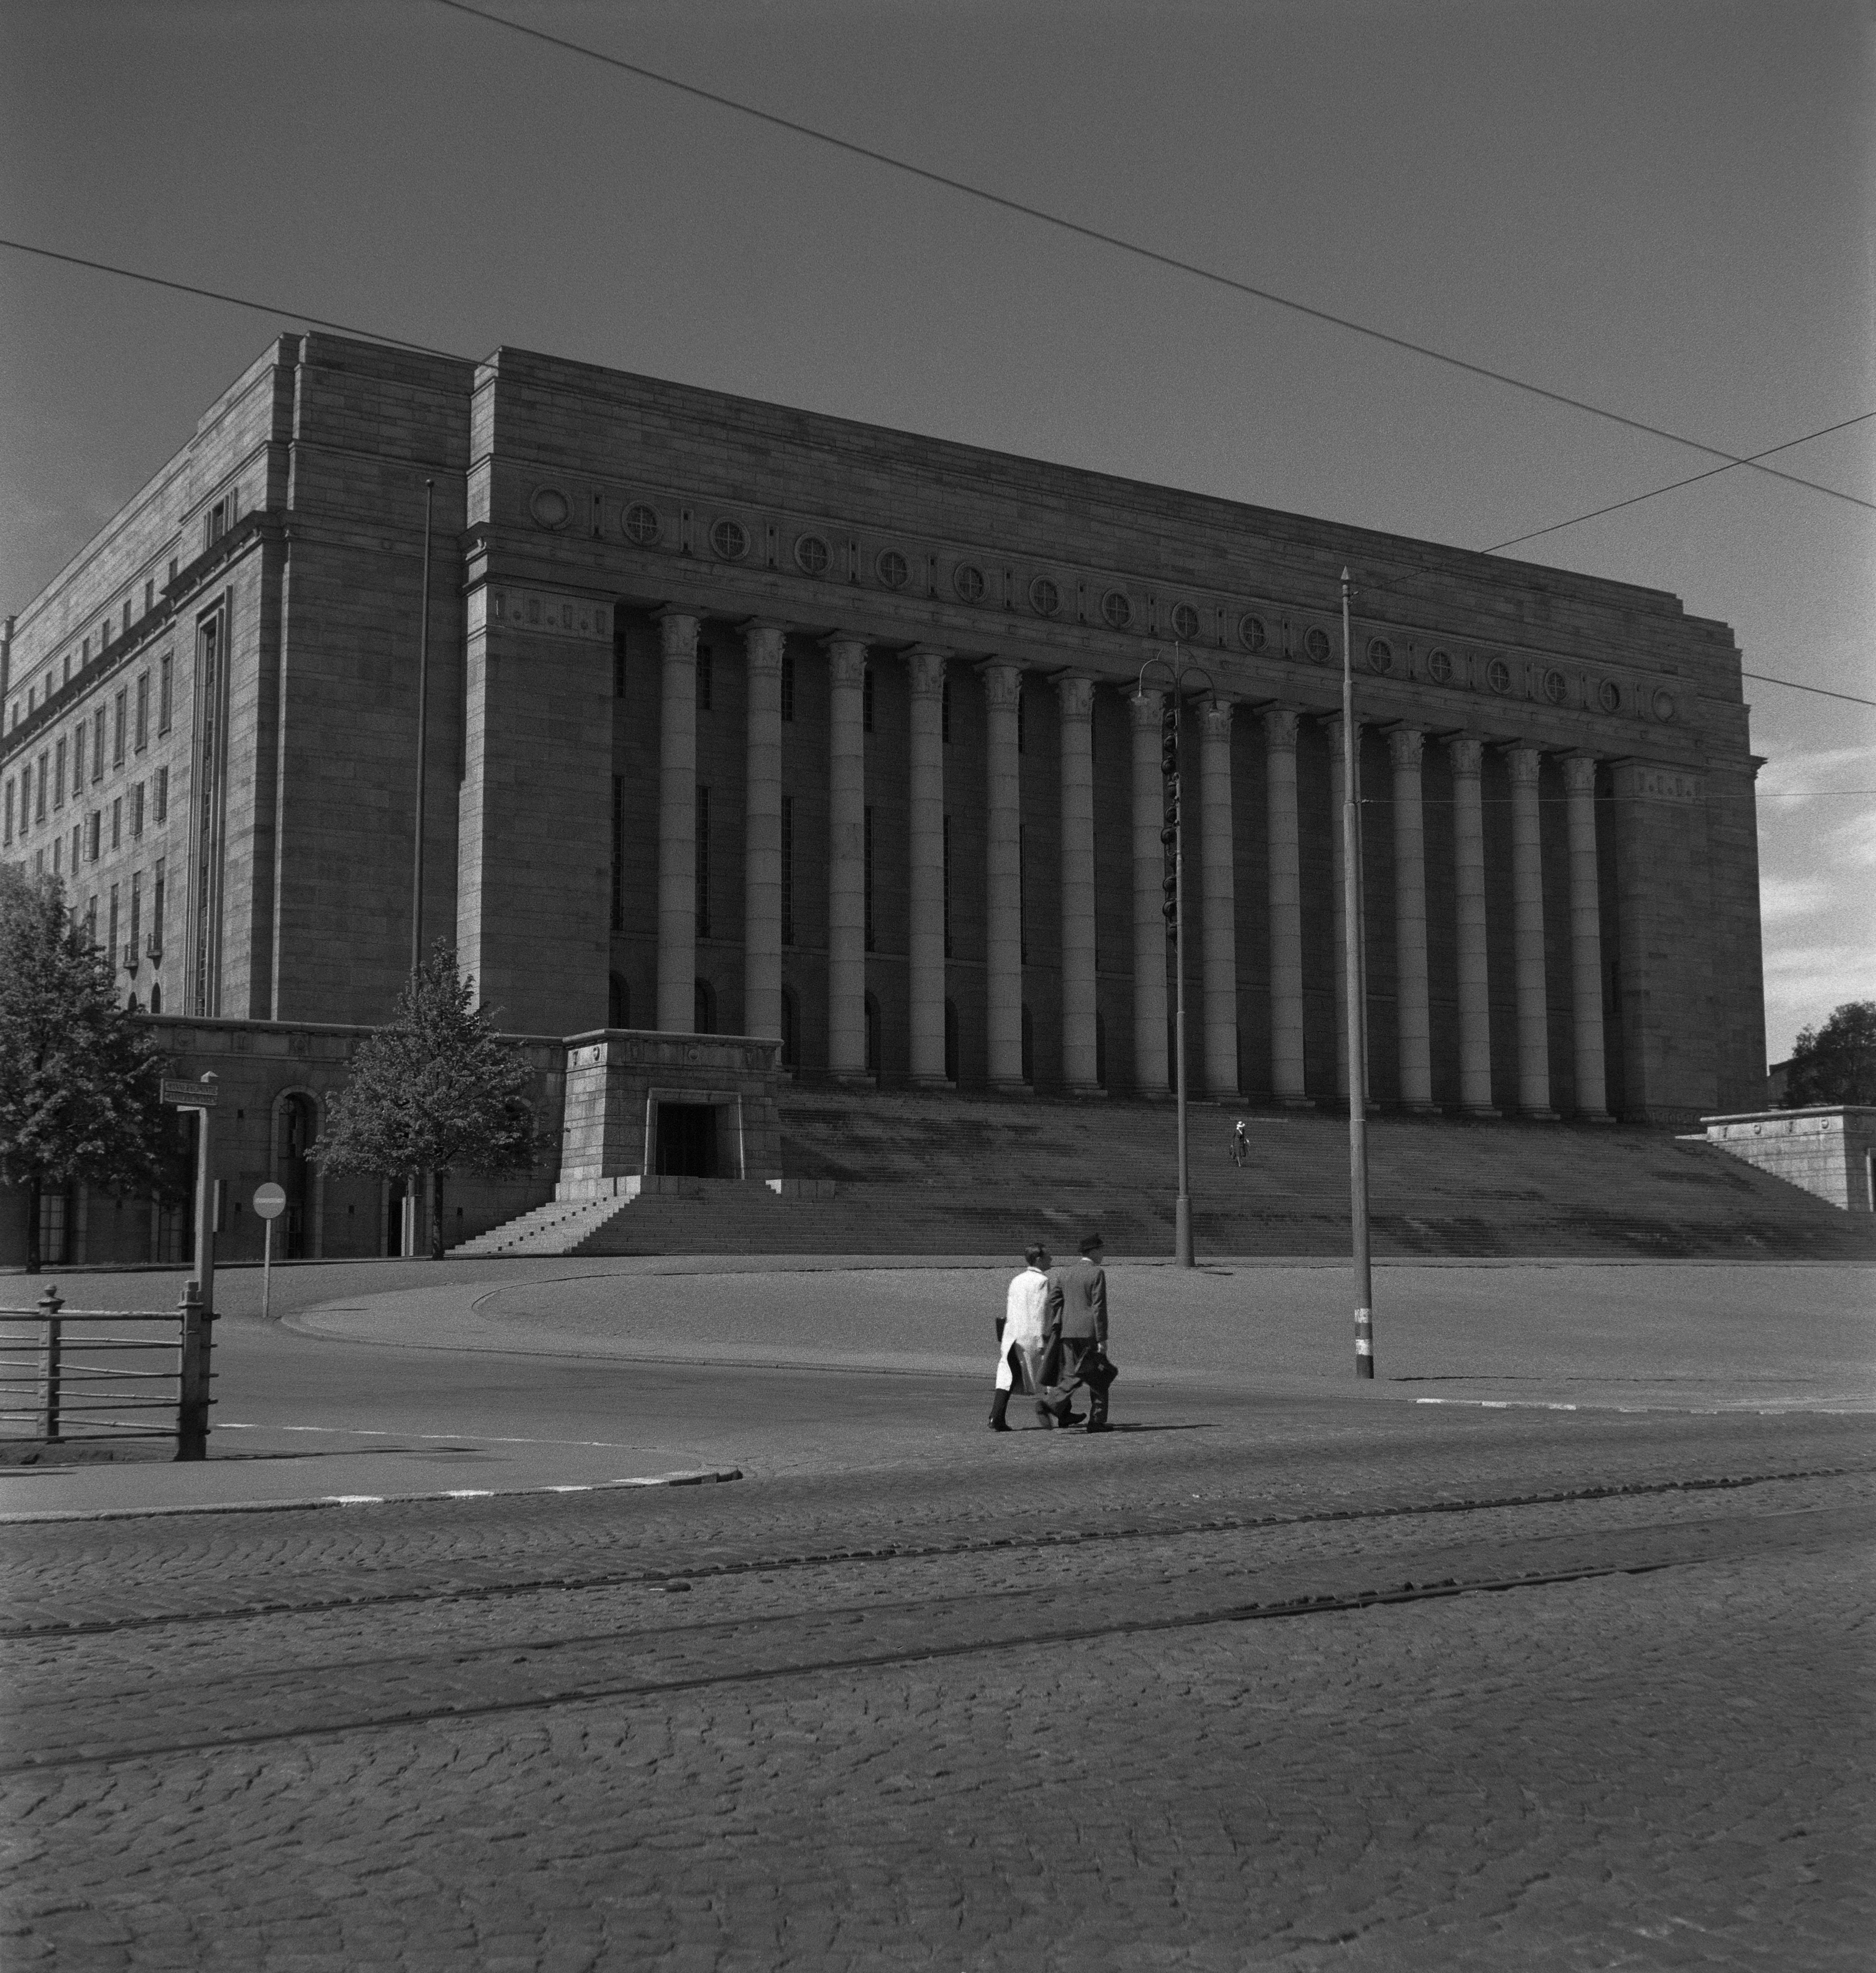 The Parliament House of Finland, 1945 (29229262650) - The Parliament House of Finland.Photo: Ruth Träskman/Yle.
The House of Representatives in 1945.
Do you know something about this picture? Please leave a comment or contact us by e-mail: flickr@yle.fi Read more about Yle, the Finnish Broadcasting Company: http://yle.fi/life park Fler skatter från Yles archive: http://svenska.yle.fi/arkivet More about Yle, the Finnish Broadcasting Company: http://yle.fi/yleisradio/ About-yle/this-is-yle